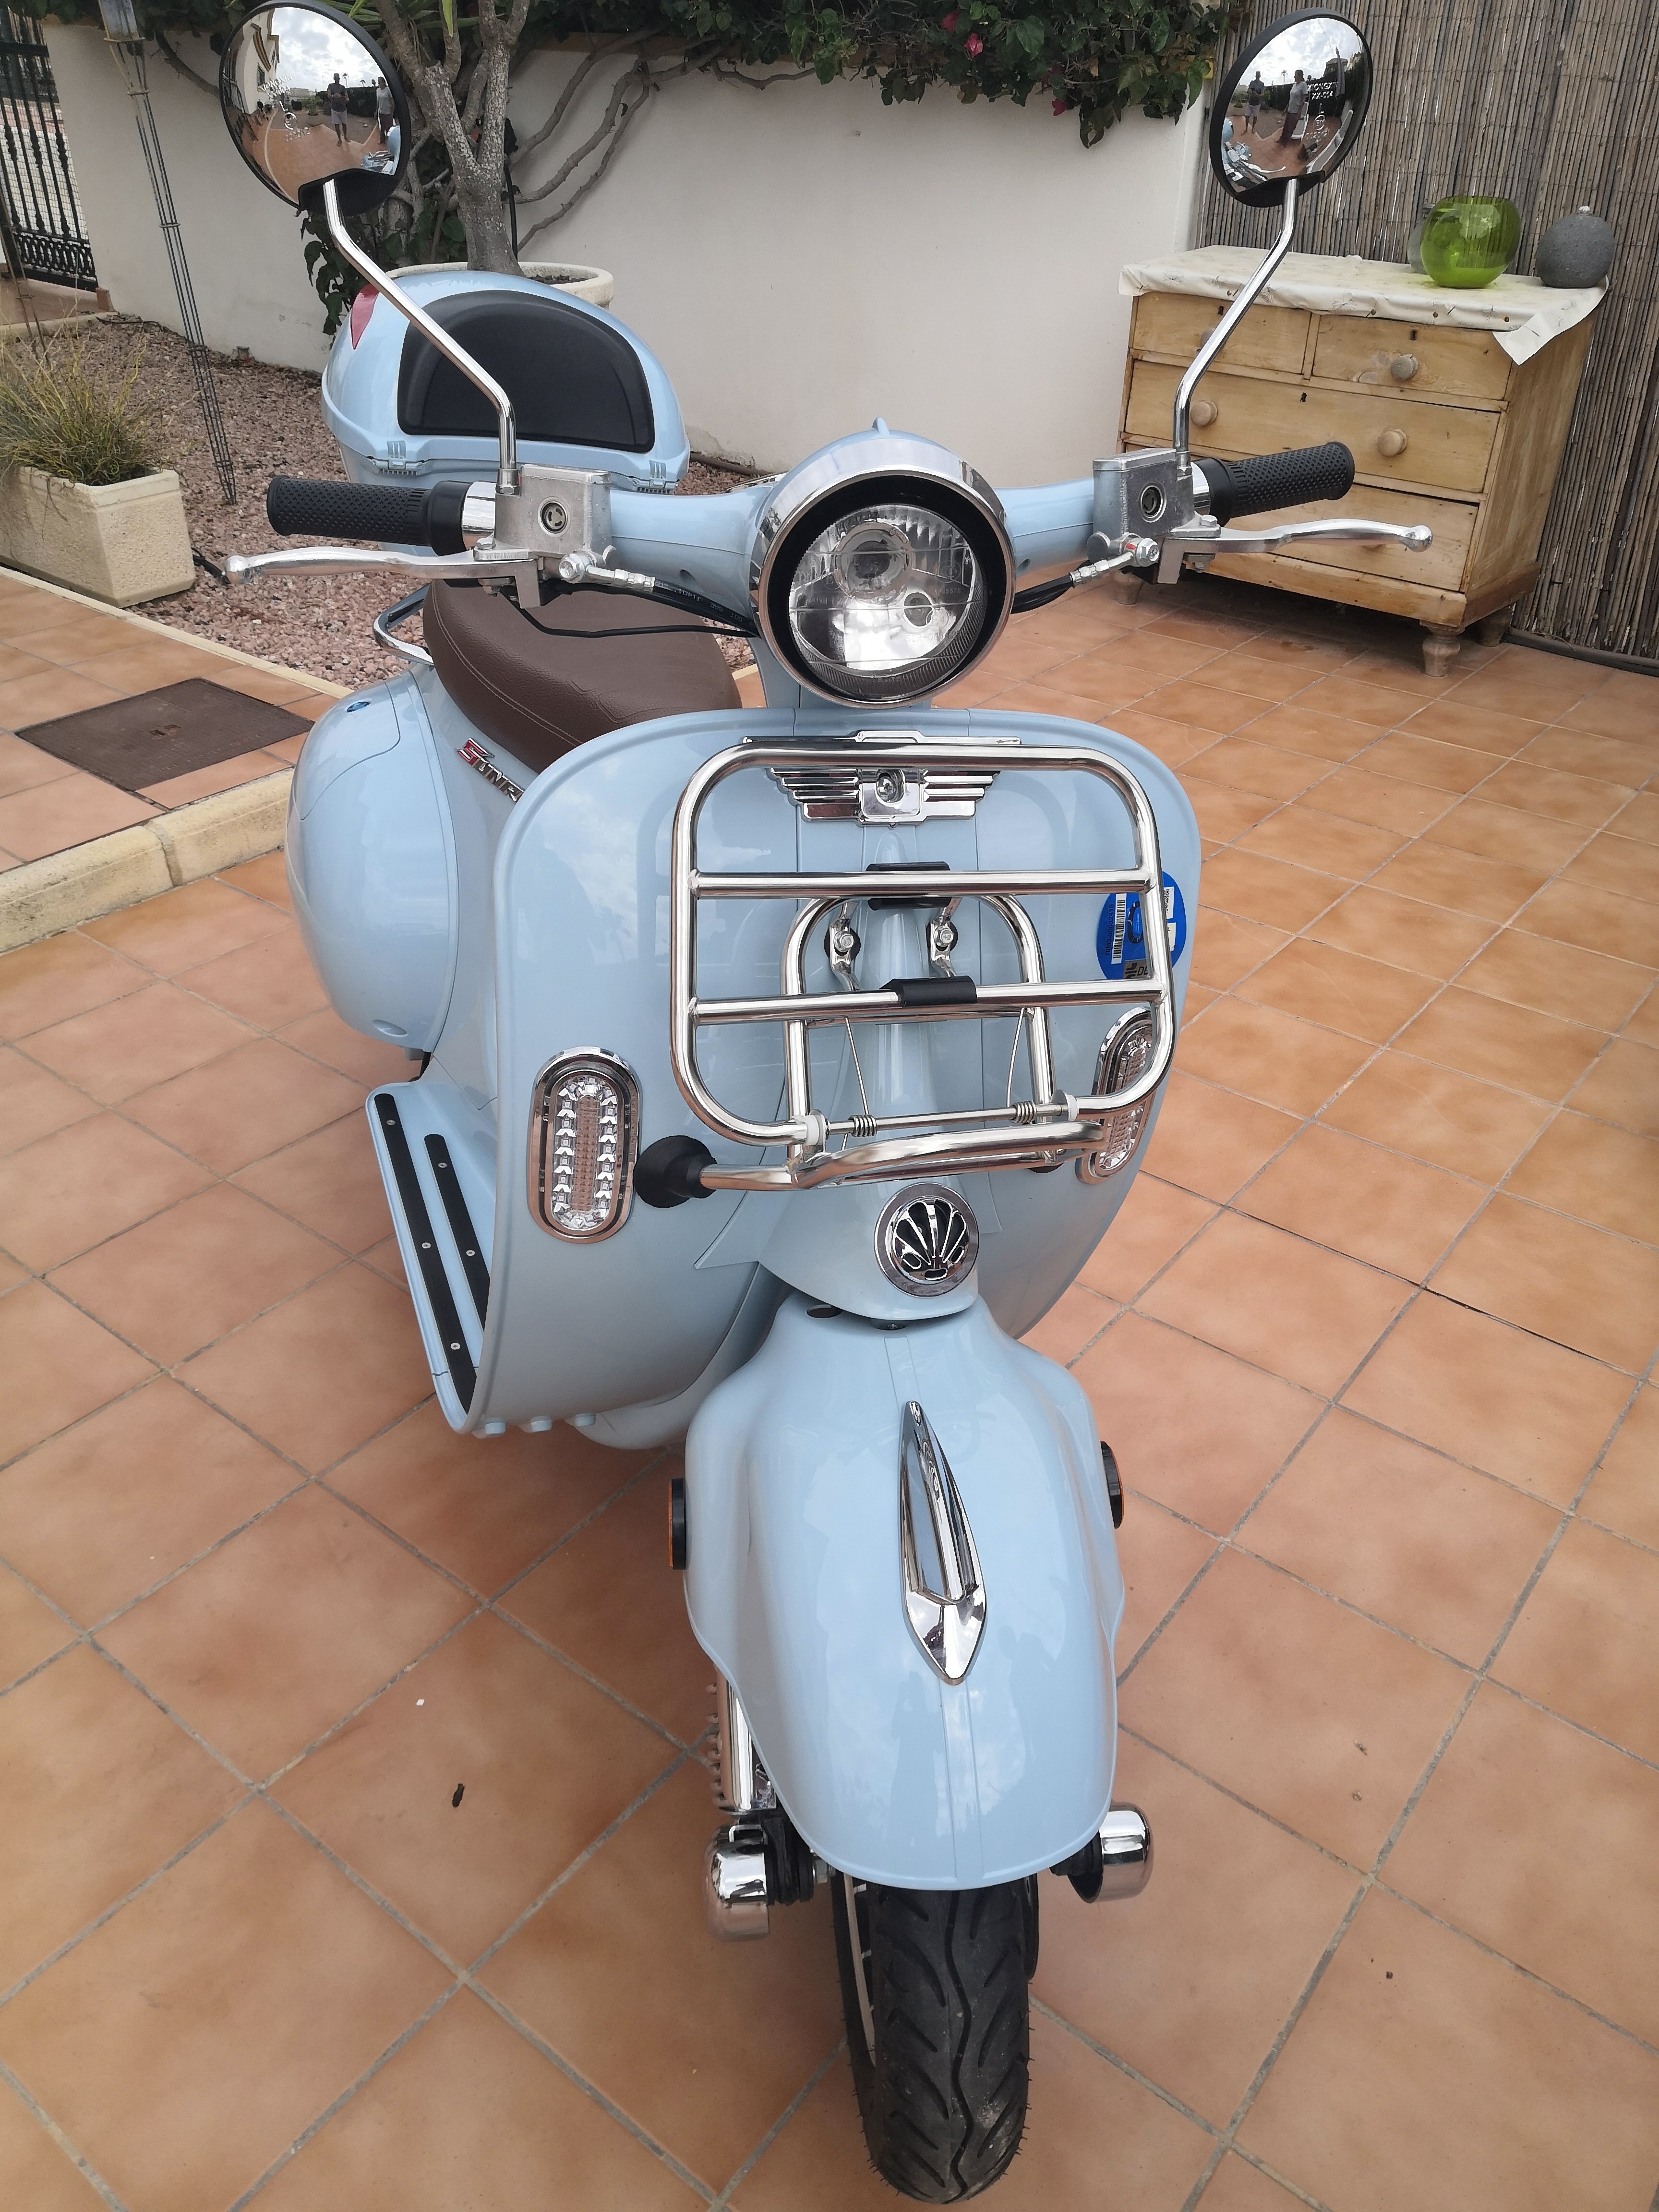 sale: new Sunra Ronic electric motorcycle is a vintage style electric moped inspired by Vespa - Buy and sell items in - Rojales forum - Costa Blanca forum